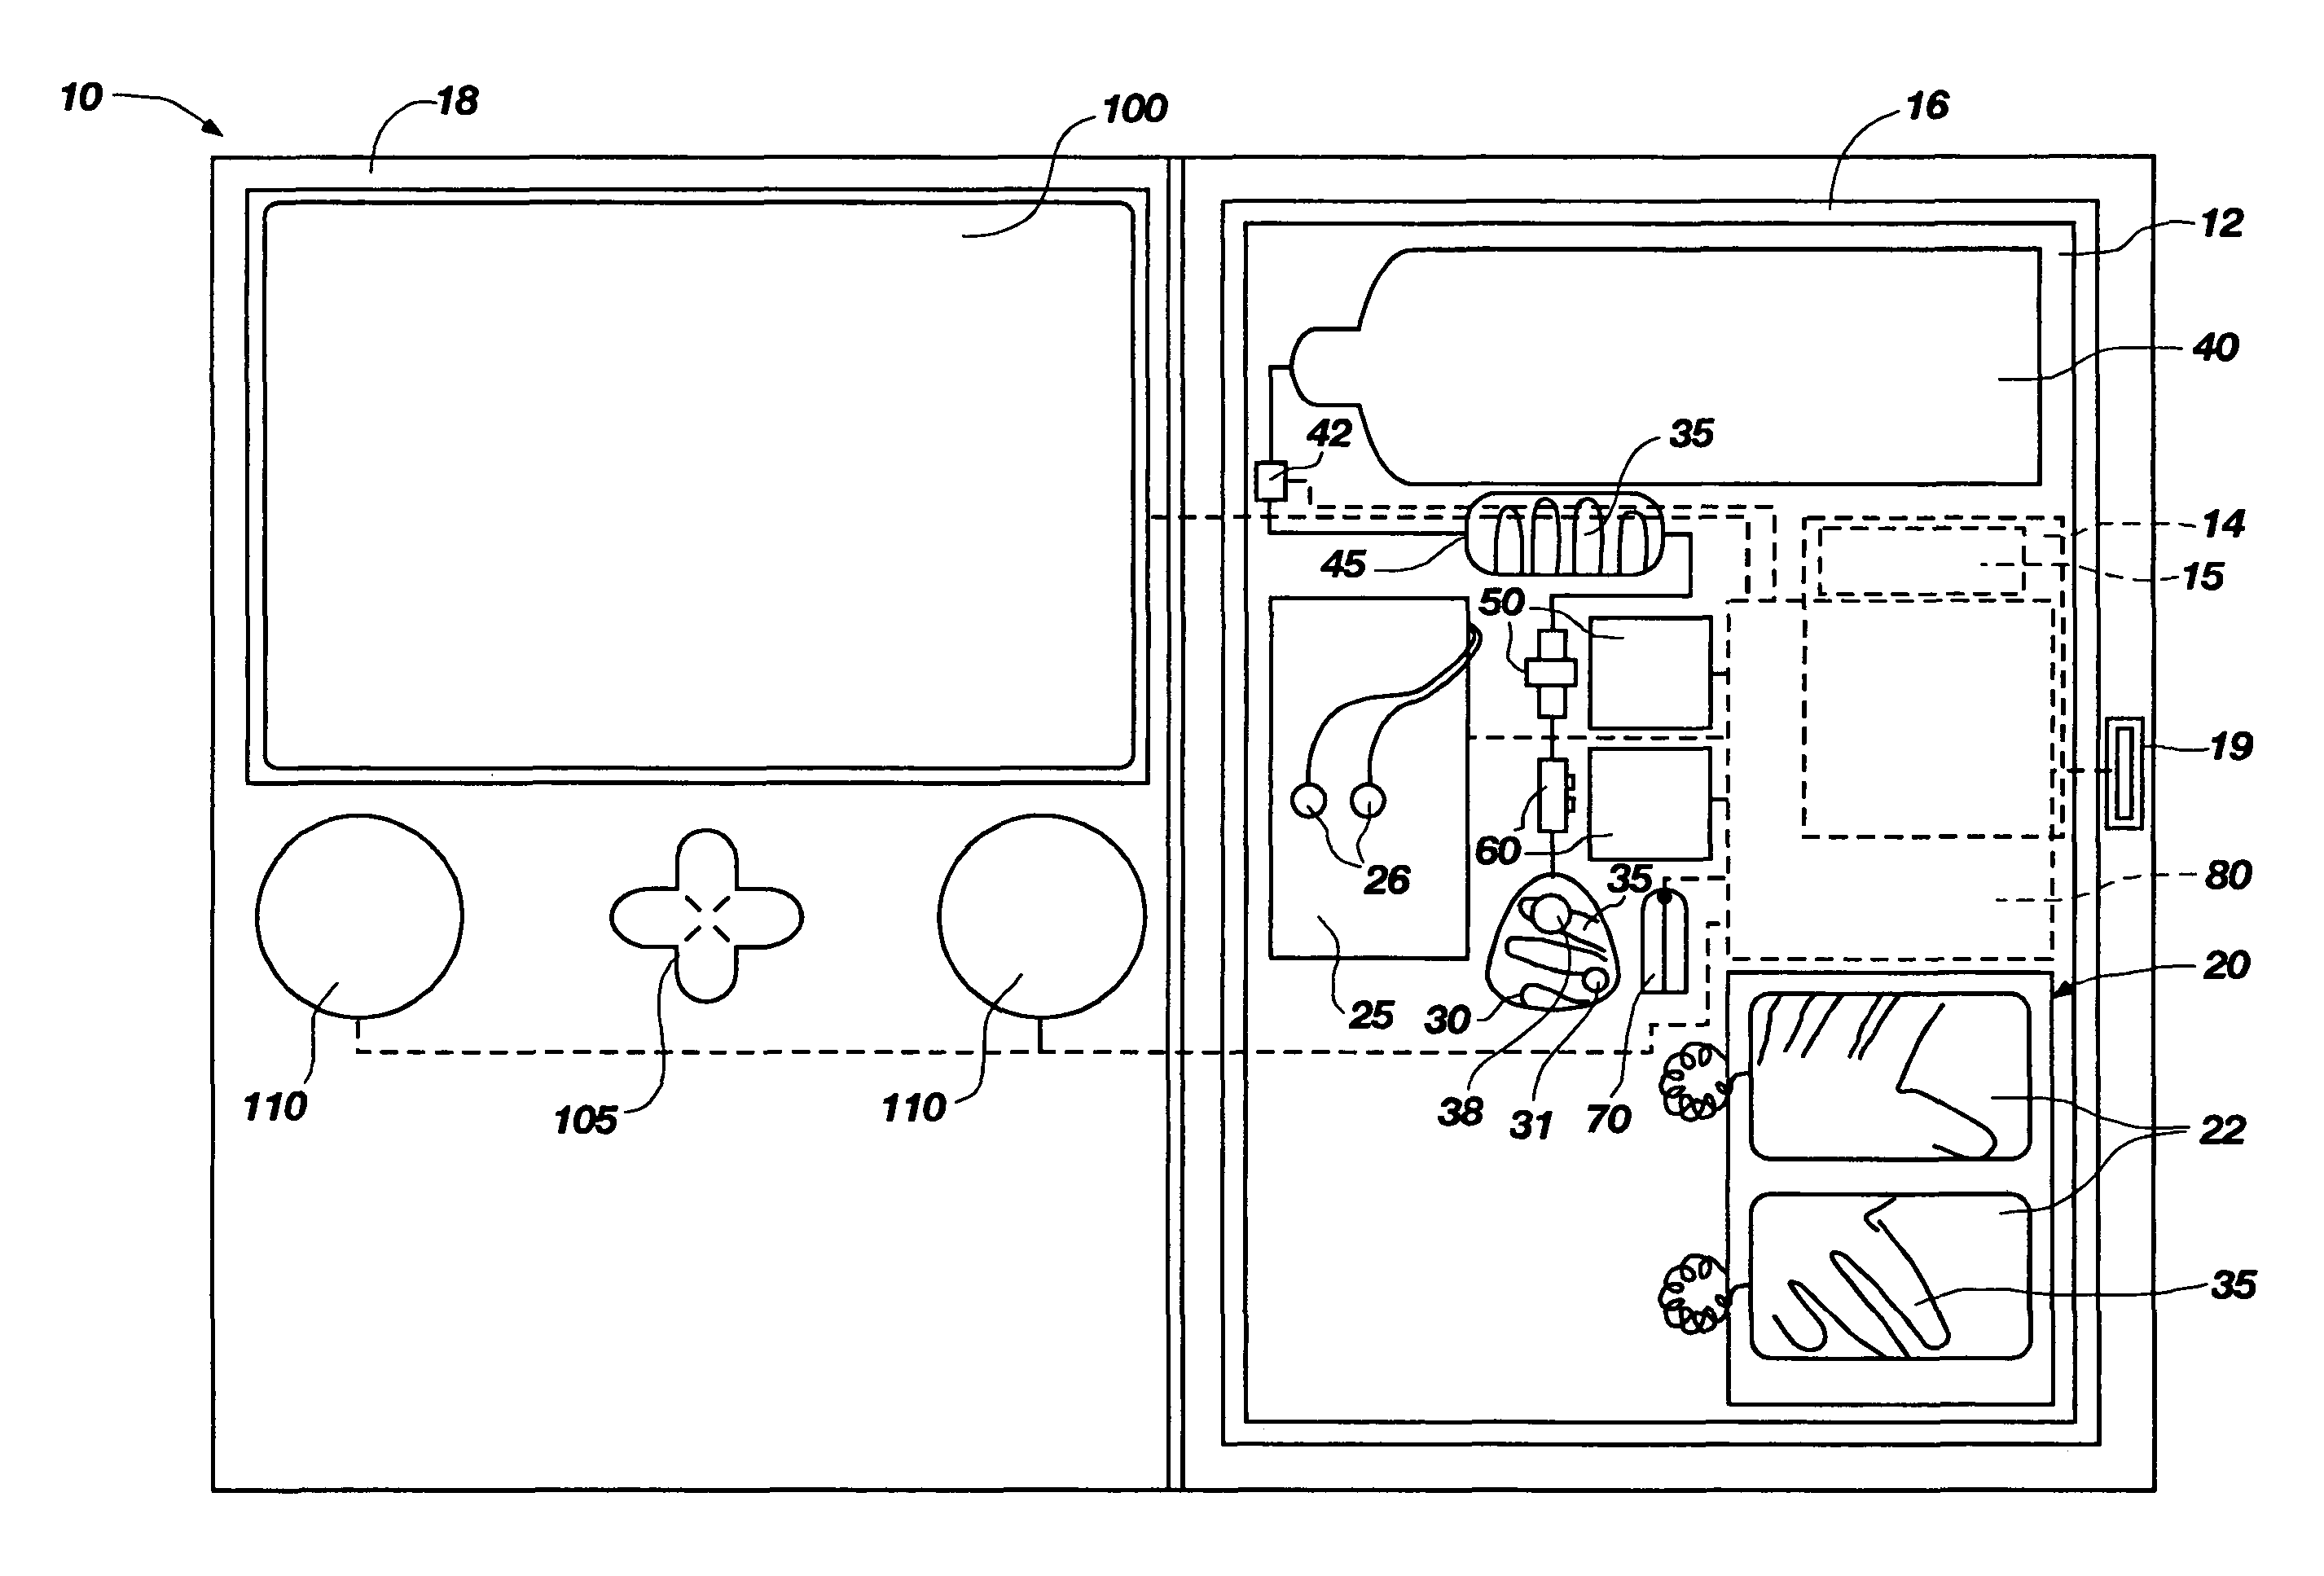 System for providing emergency medical care with real-time instructions and associated methods